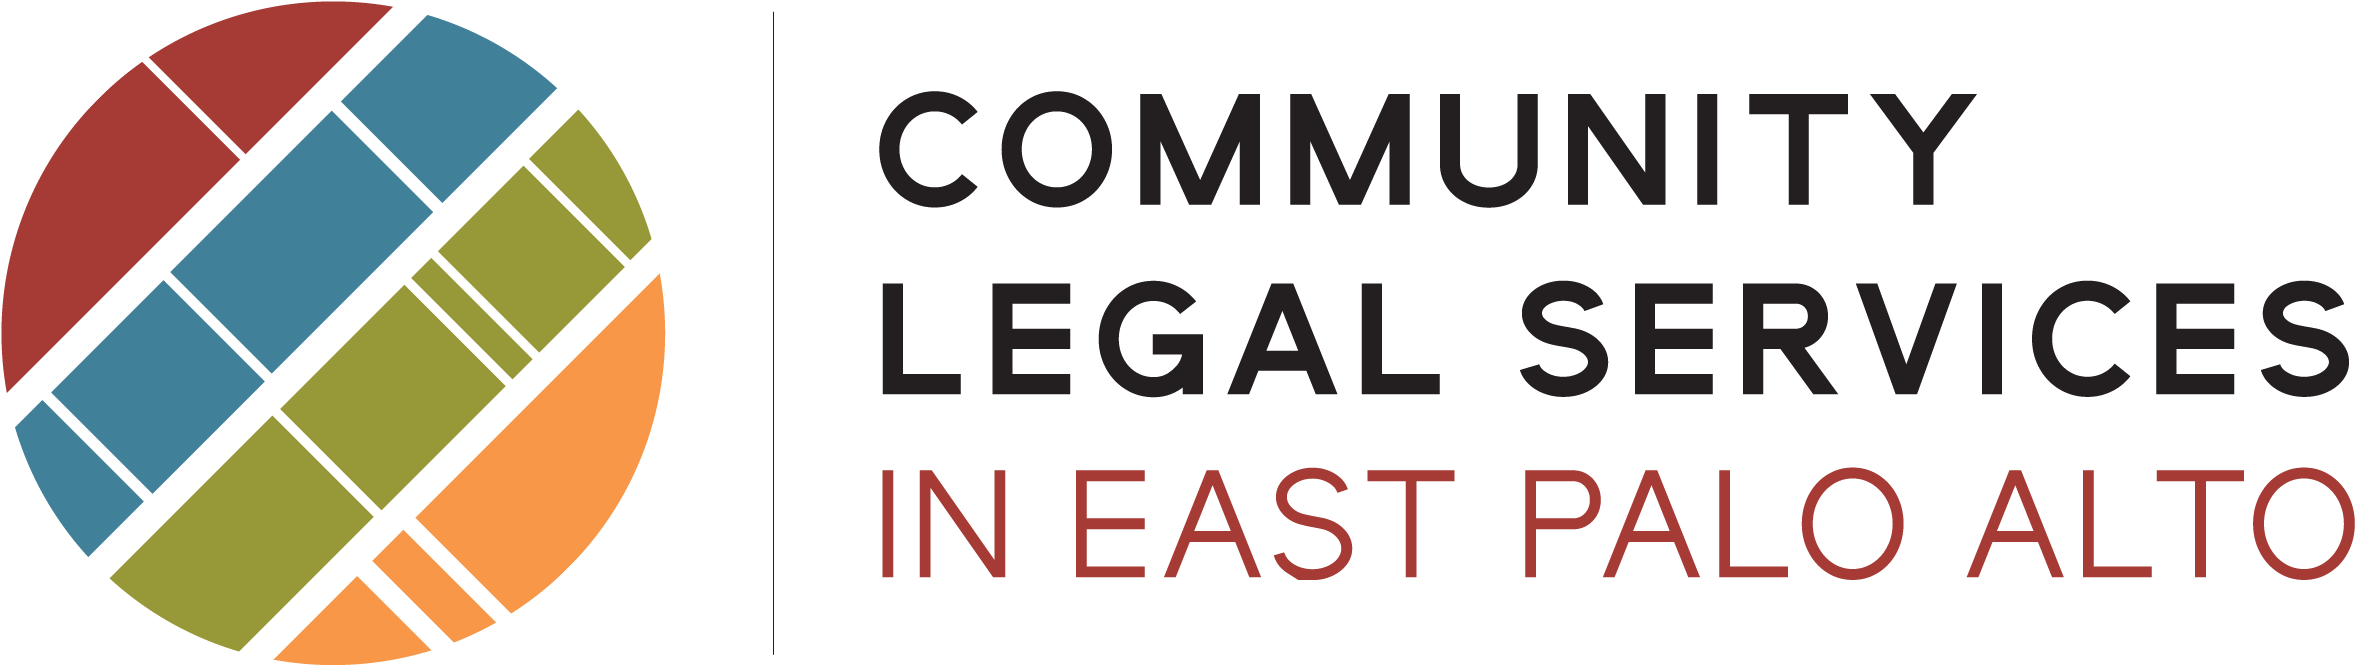 Newsroom - Community Legal Services In East Palo Alto (2400x721)